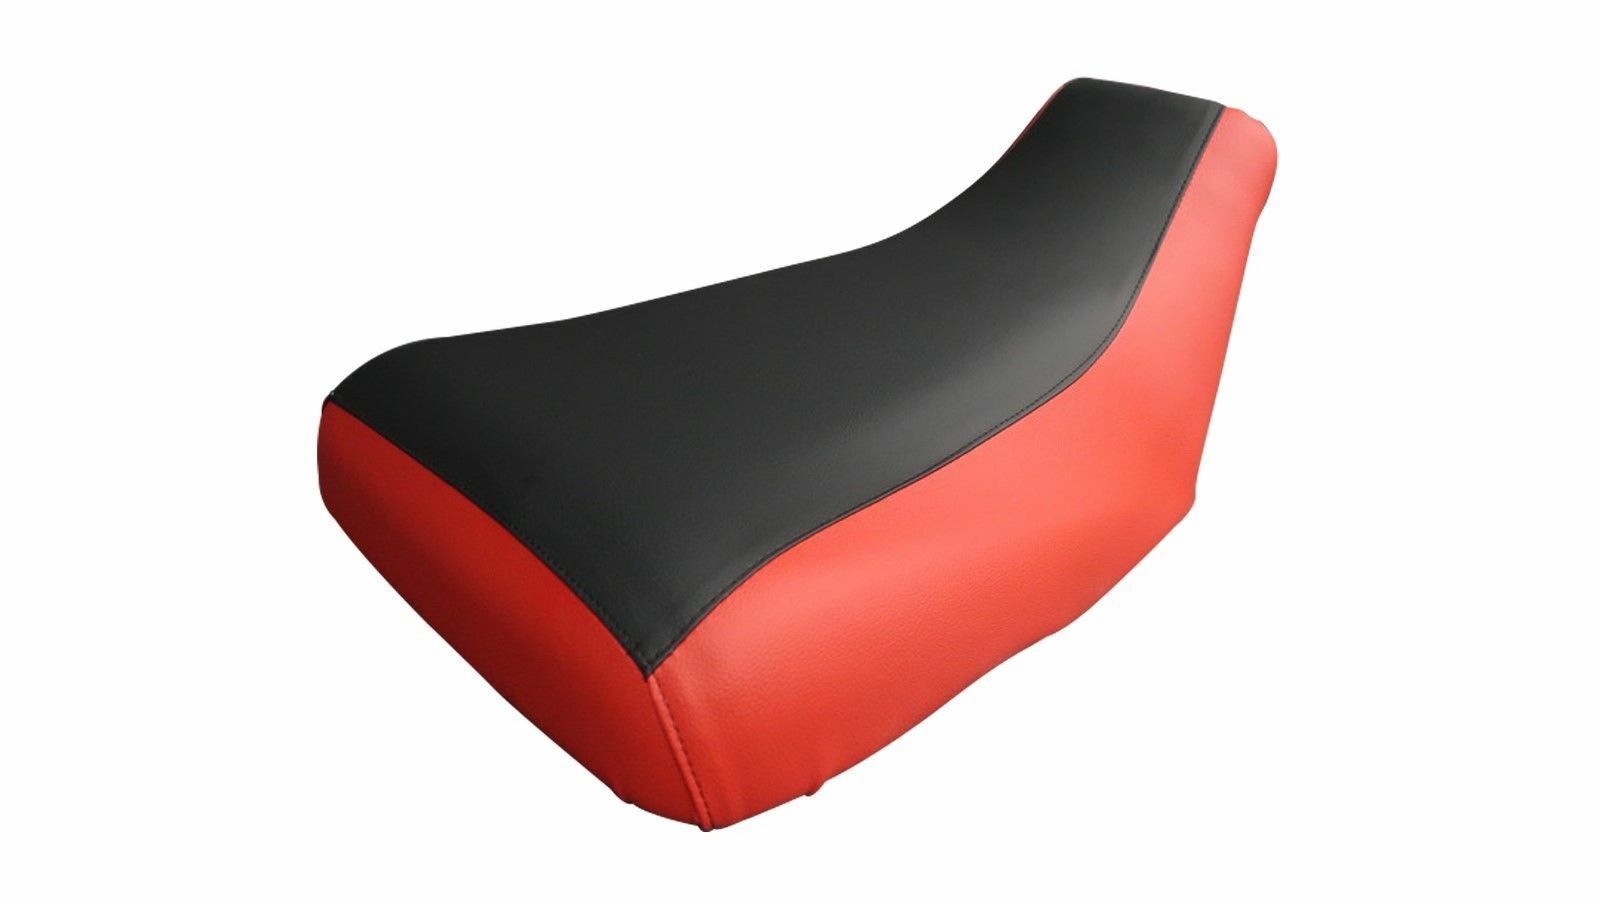 Primary image for For Honda Rancher 400 Seat Cover 2004 To 2006 Red Sides Black Top ATV Seat Cover